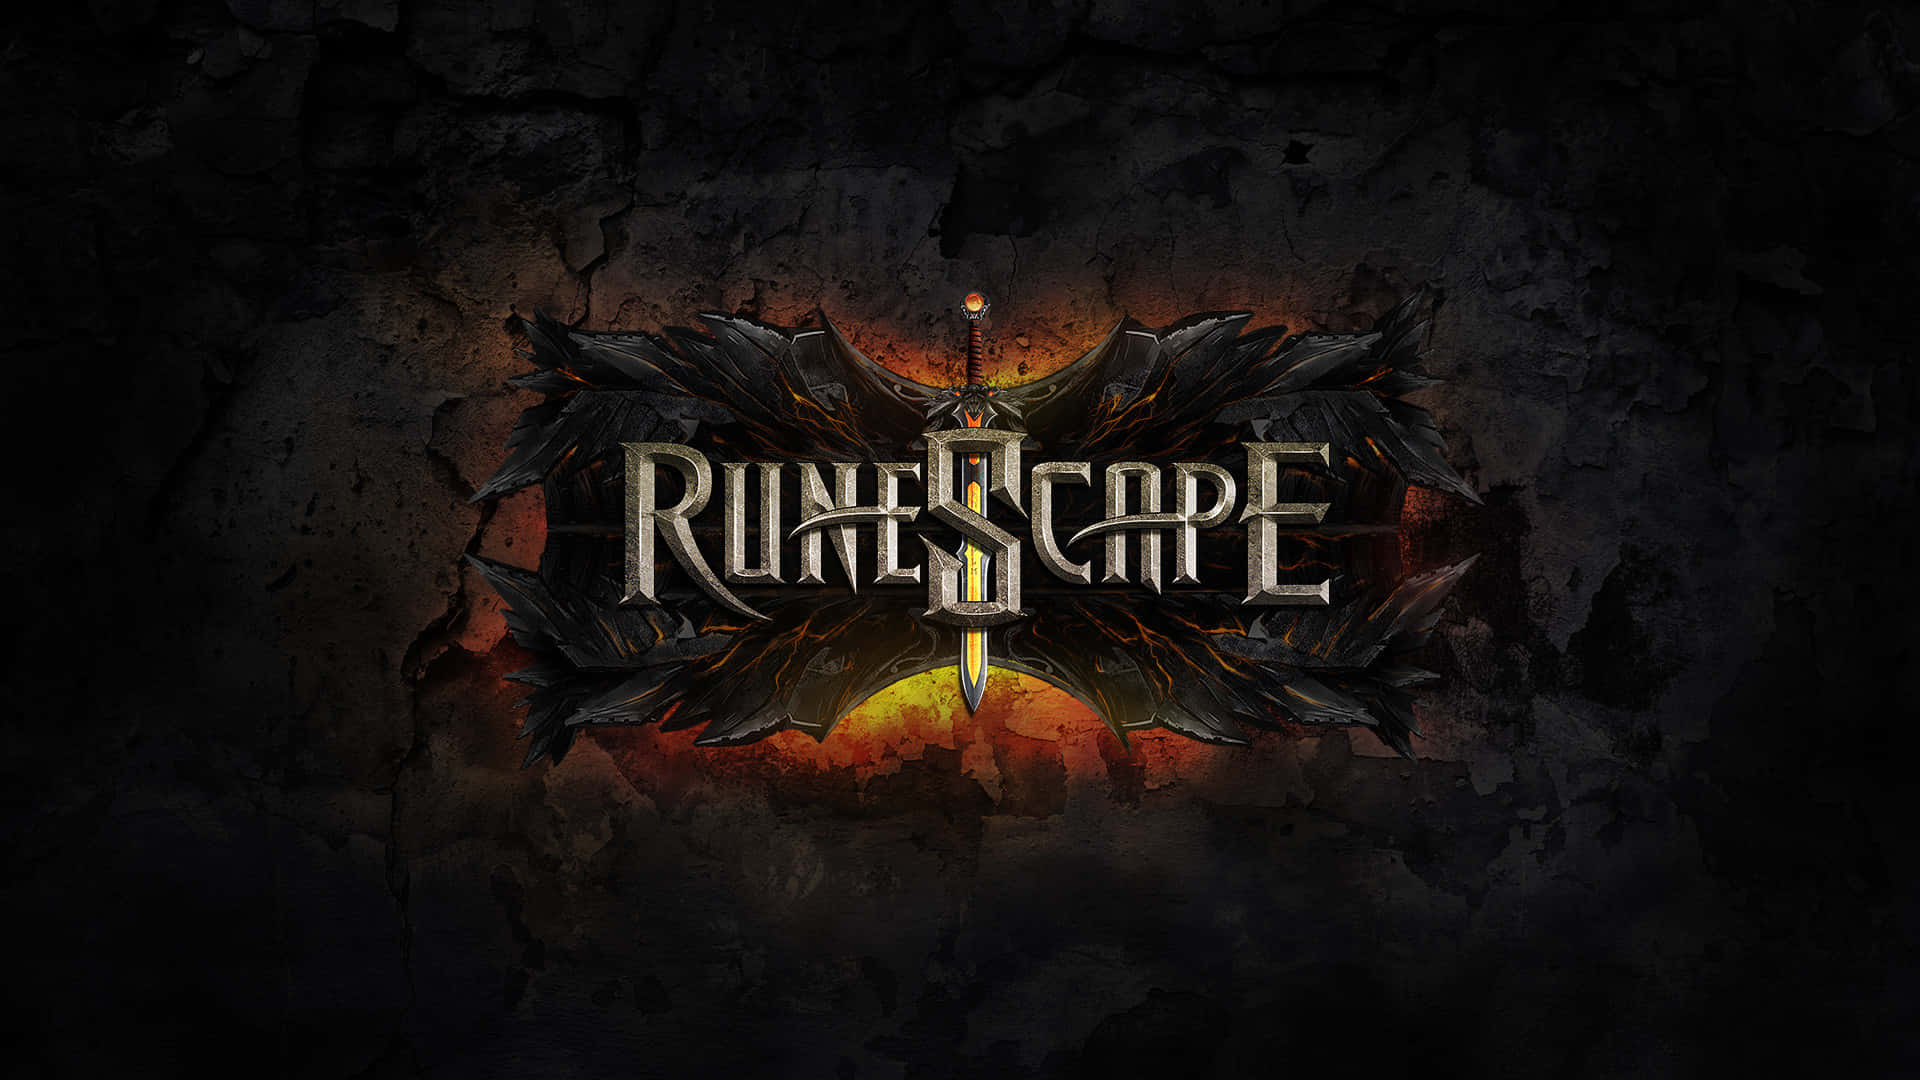 Play&Get Lost in the Fantasy World of Oldschool Runescape